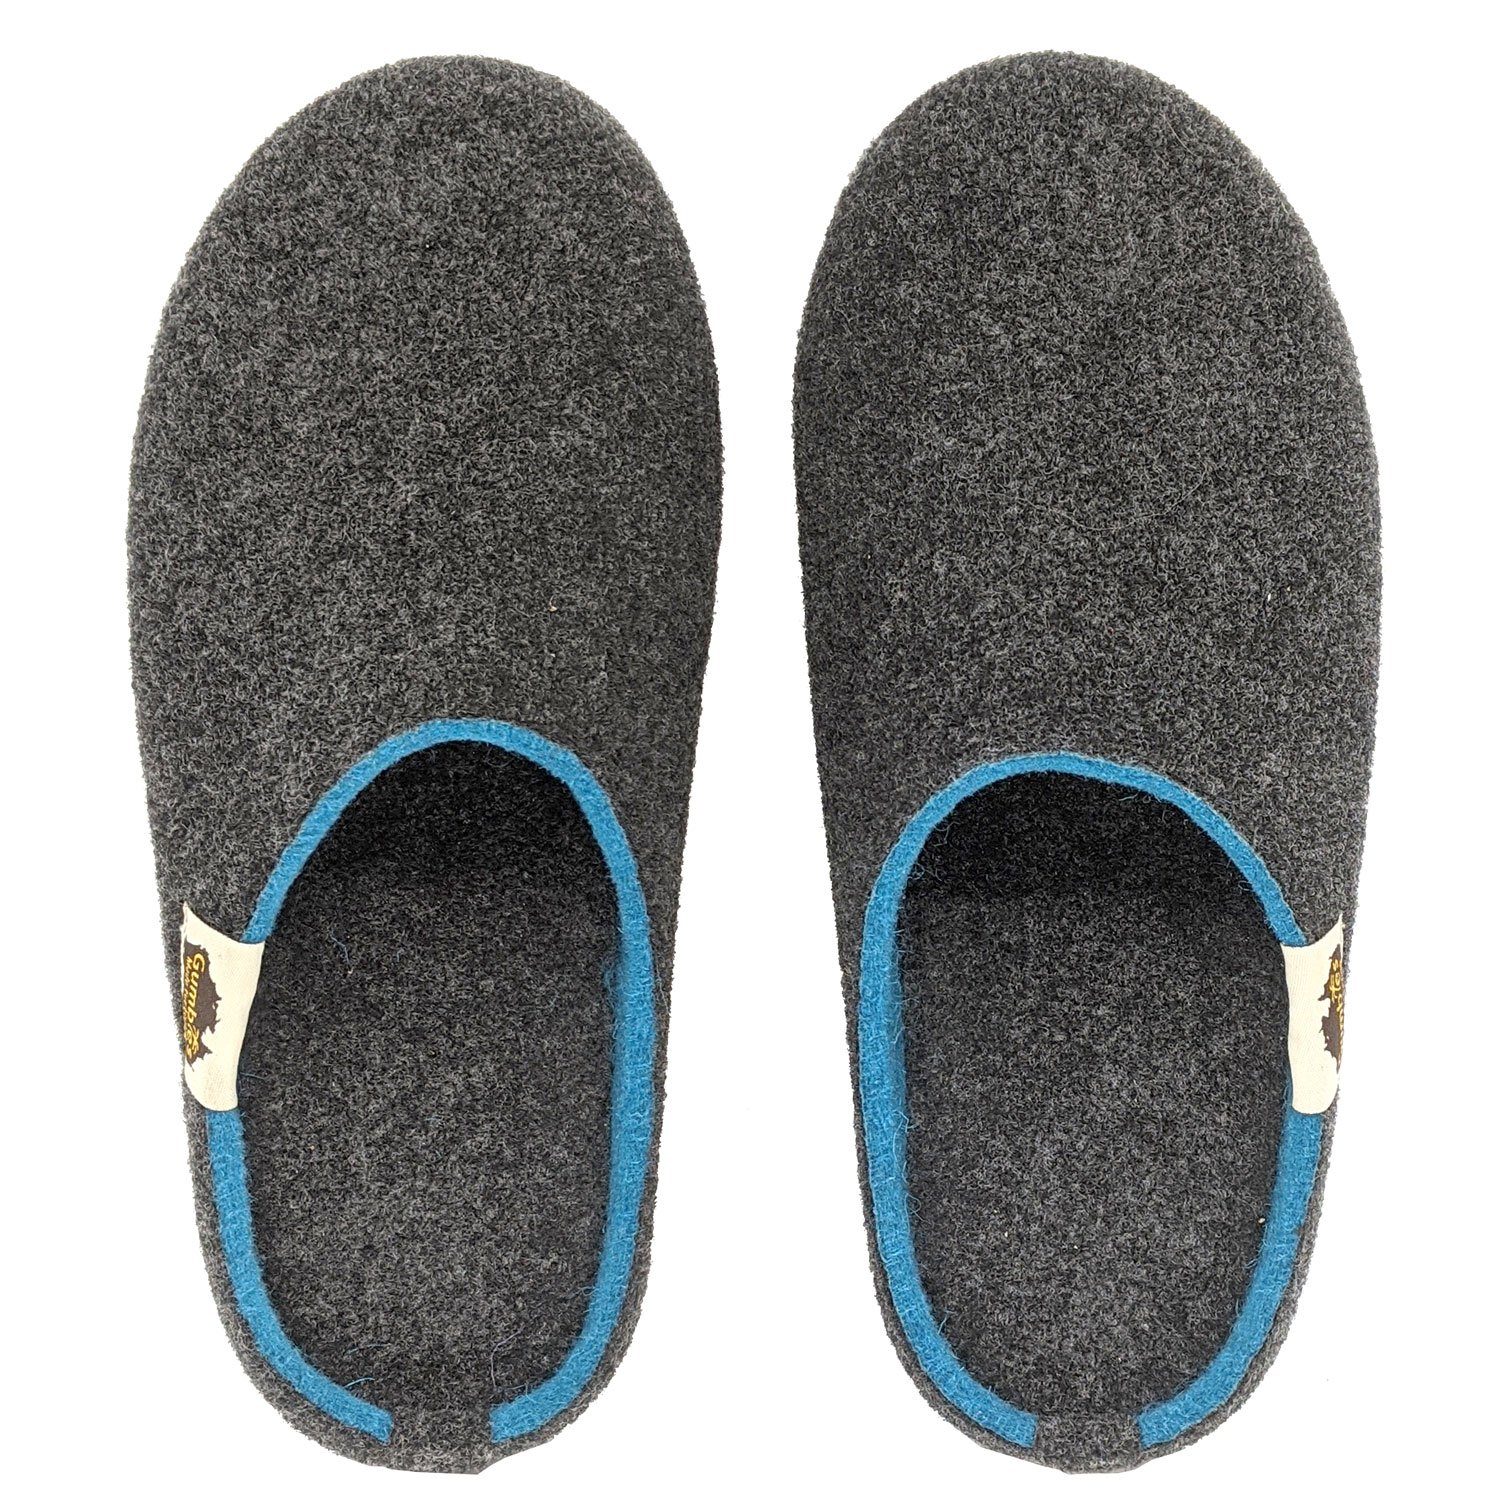 farbenfrohen charcoal-turquoise Designs« Outback Gumbies Hausschuh recycelten Slipper aus Charcoal Materialien in »in Turquoise